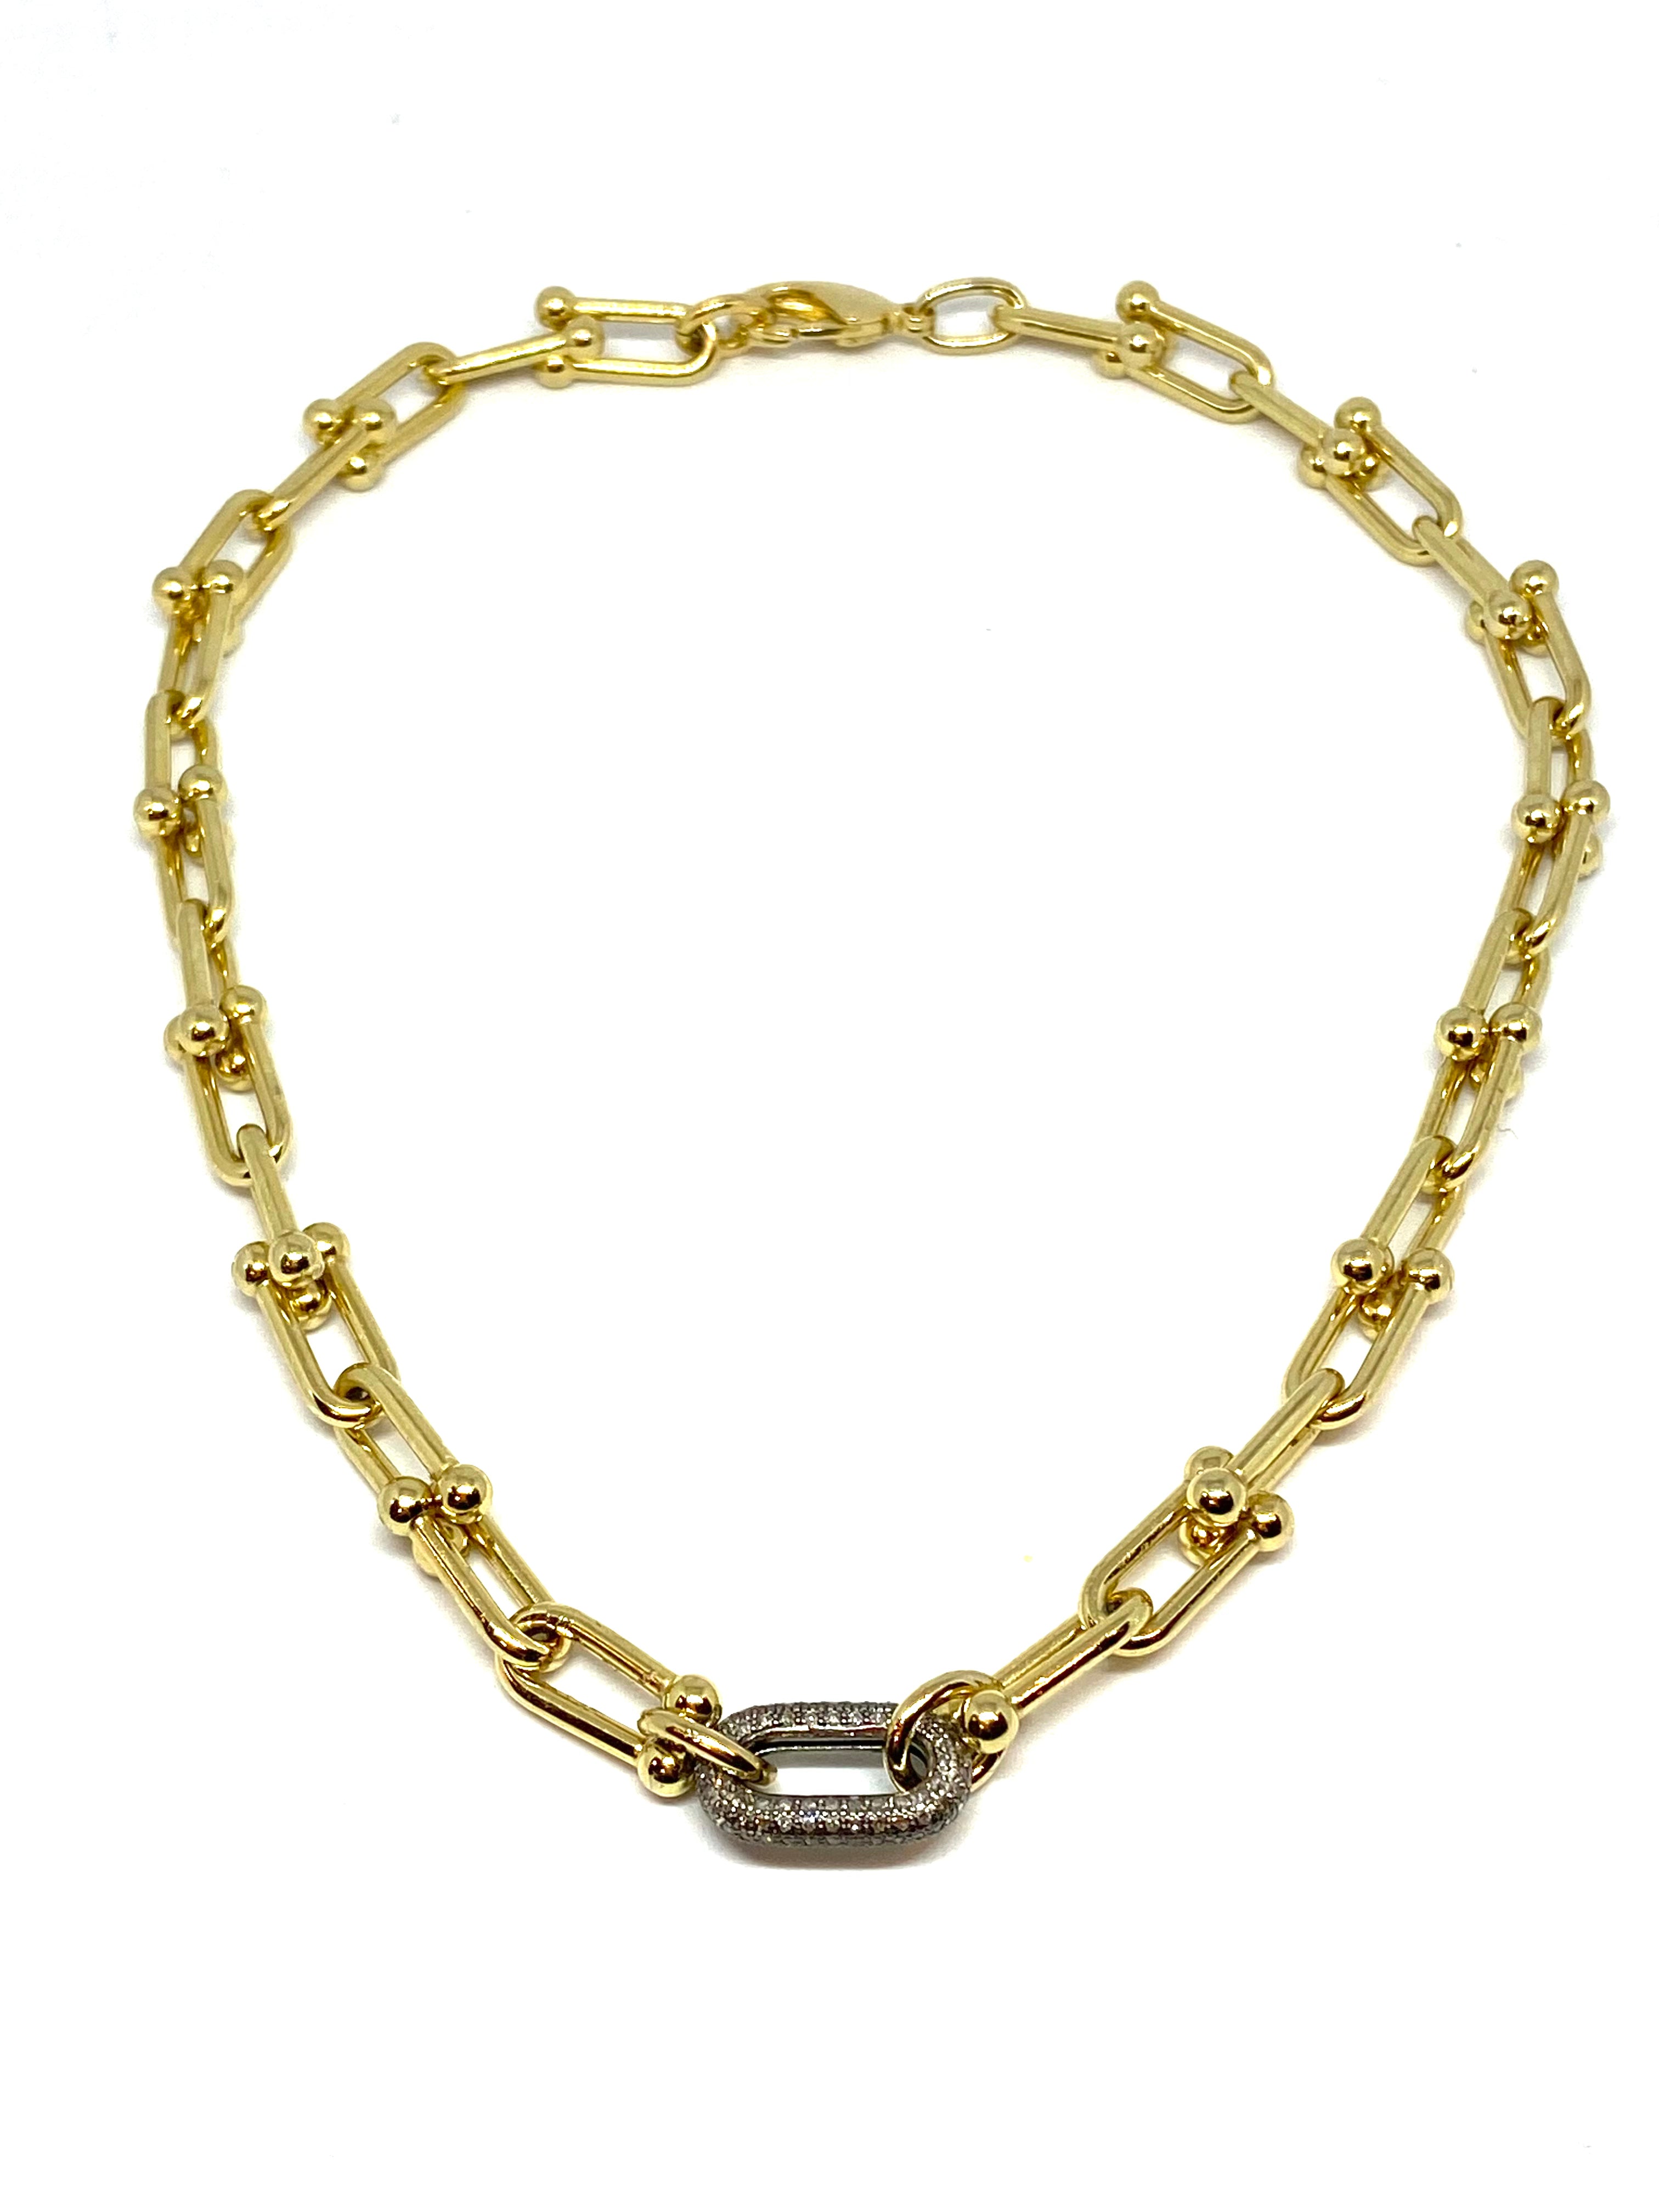 Nathan & Moe Gold Filled Chunky Chain with an Oxidized Diamond Link